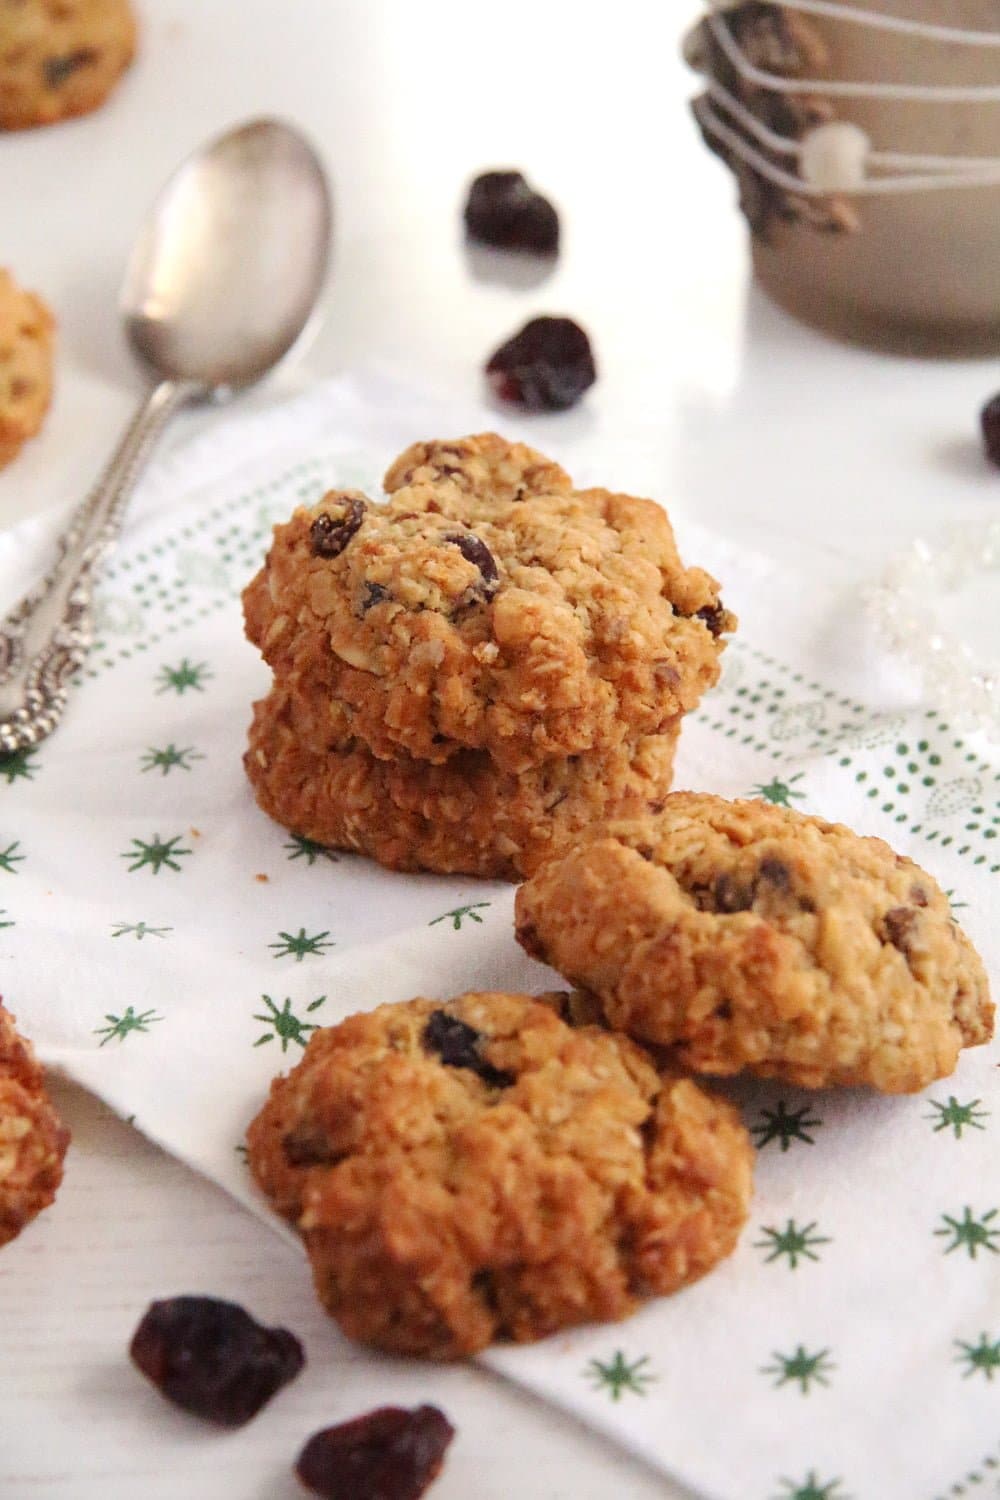 four muesli biscuits with raisins, cranberries and peanut butter